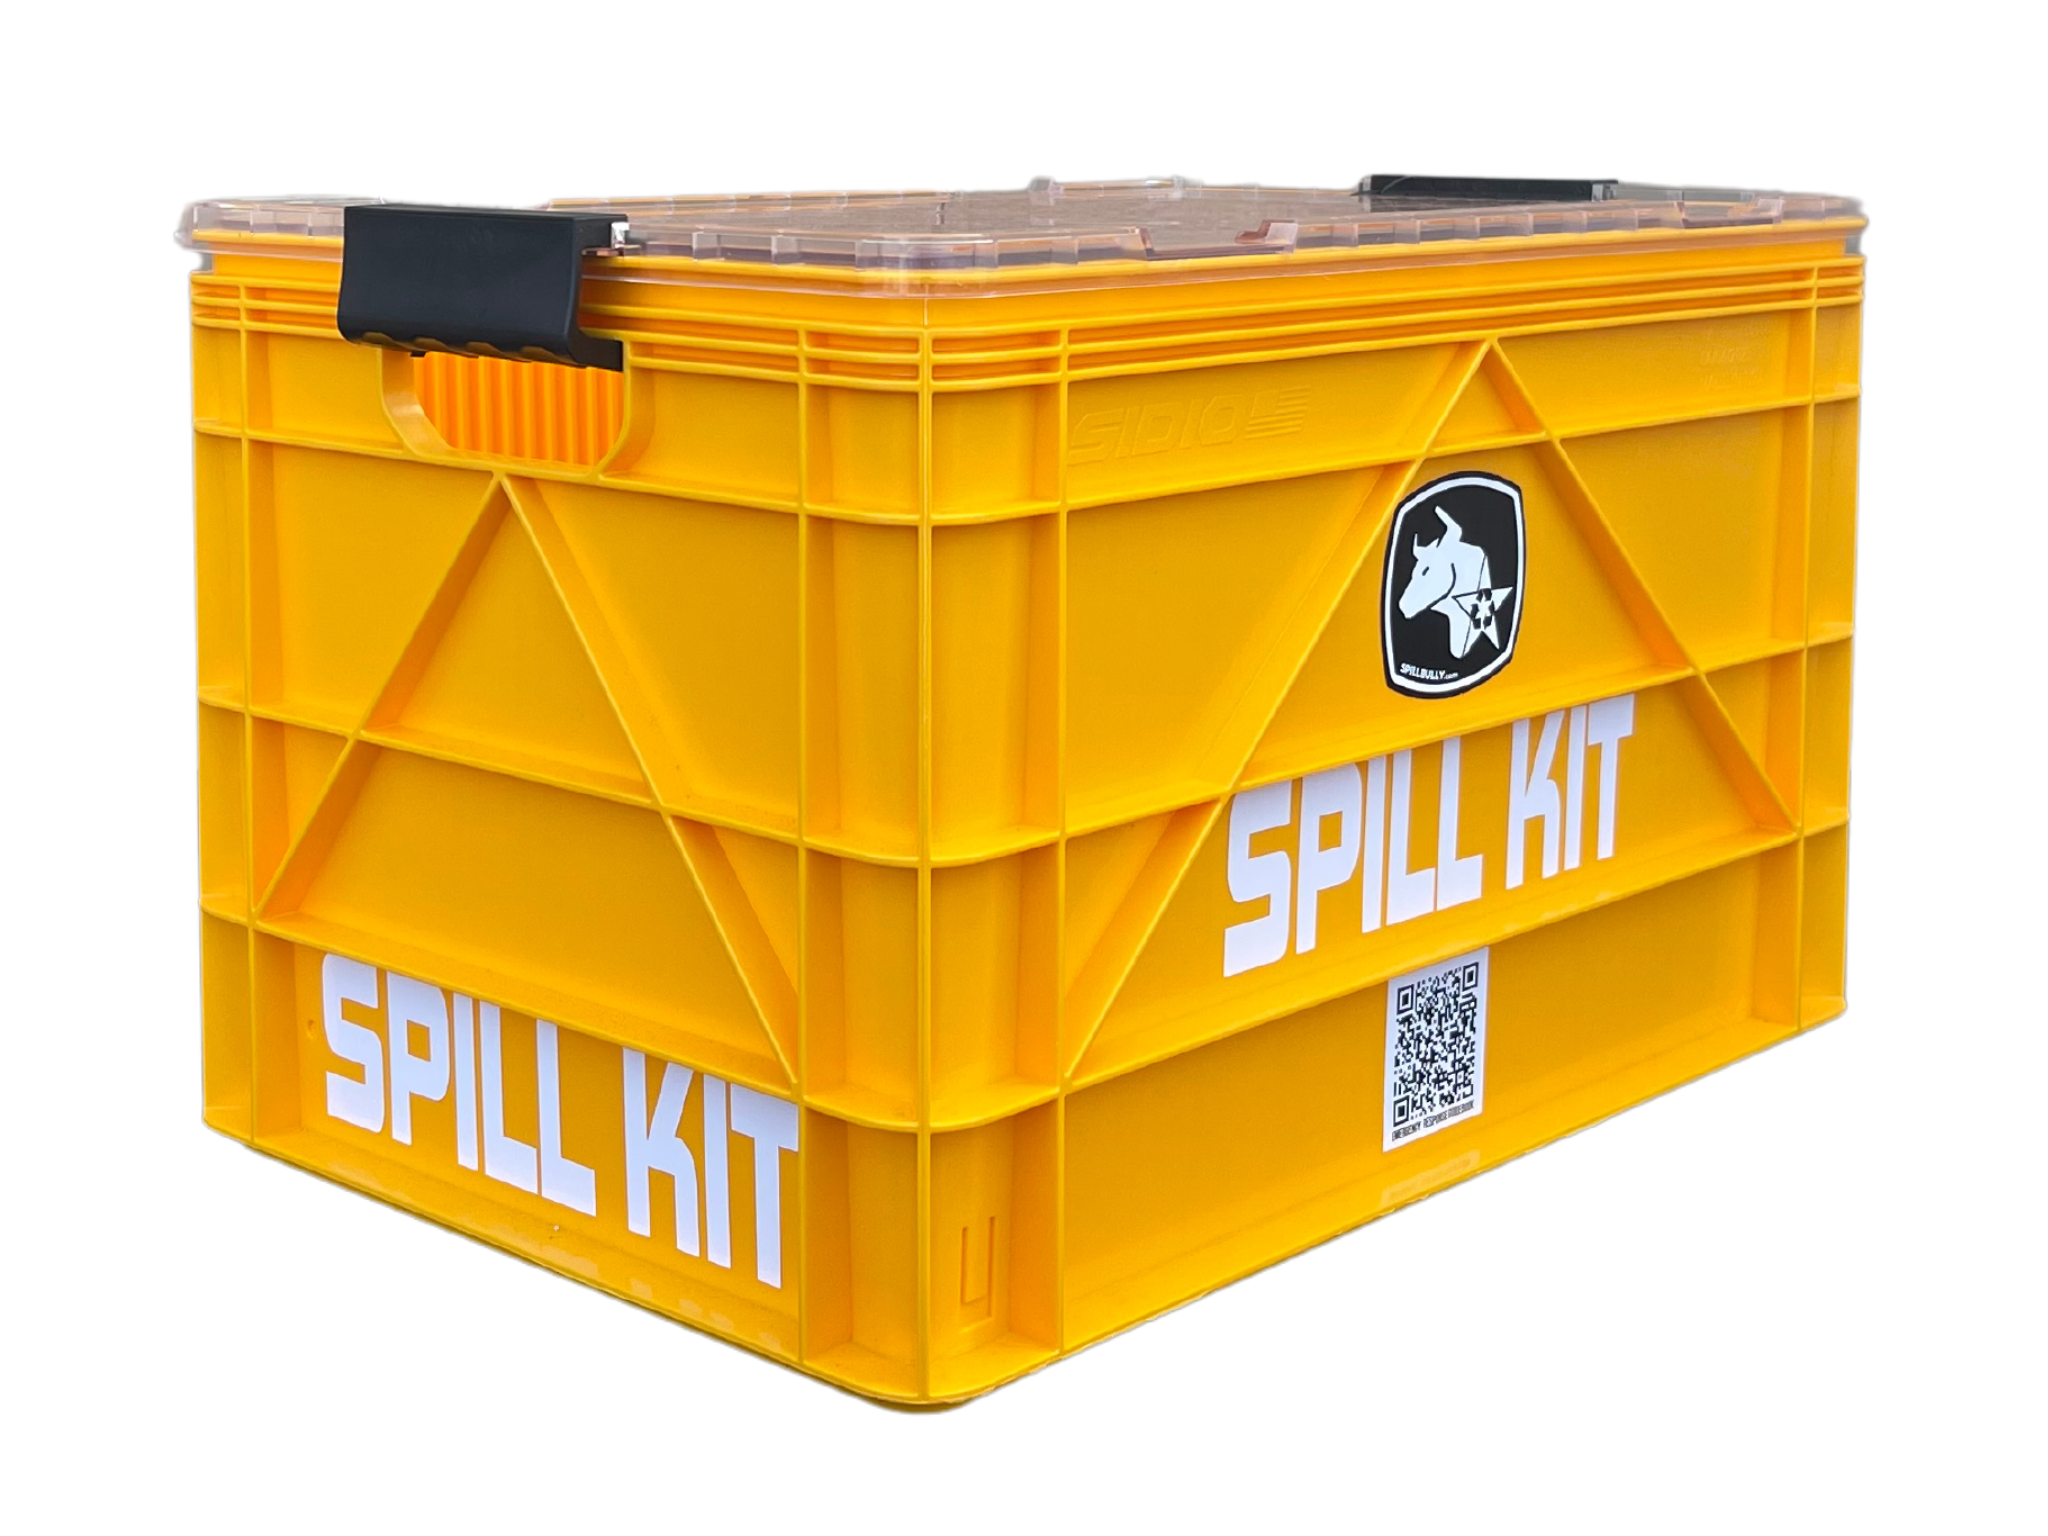 Spill Bully Spill Kit - SIDIO CRATE- Yellow